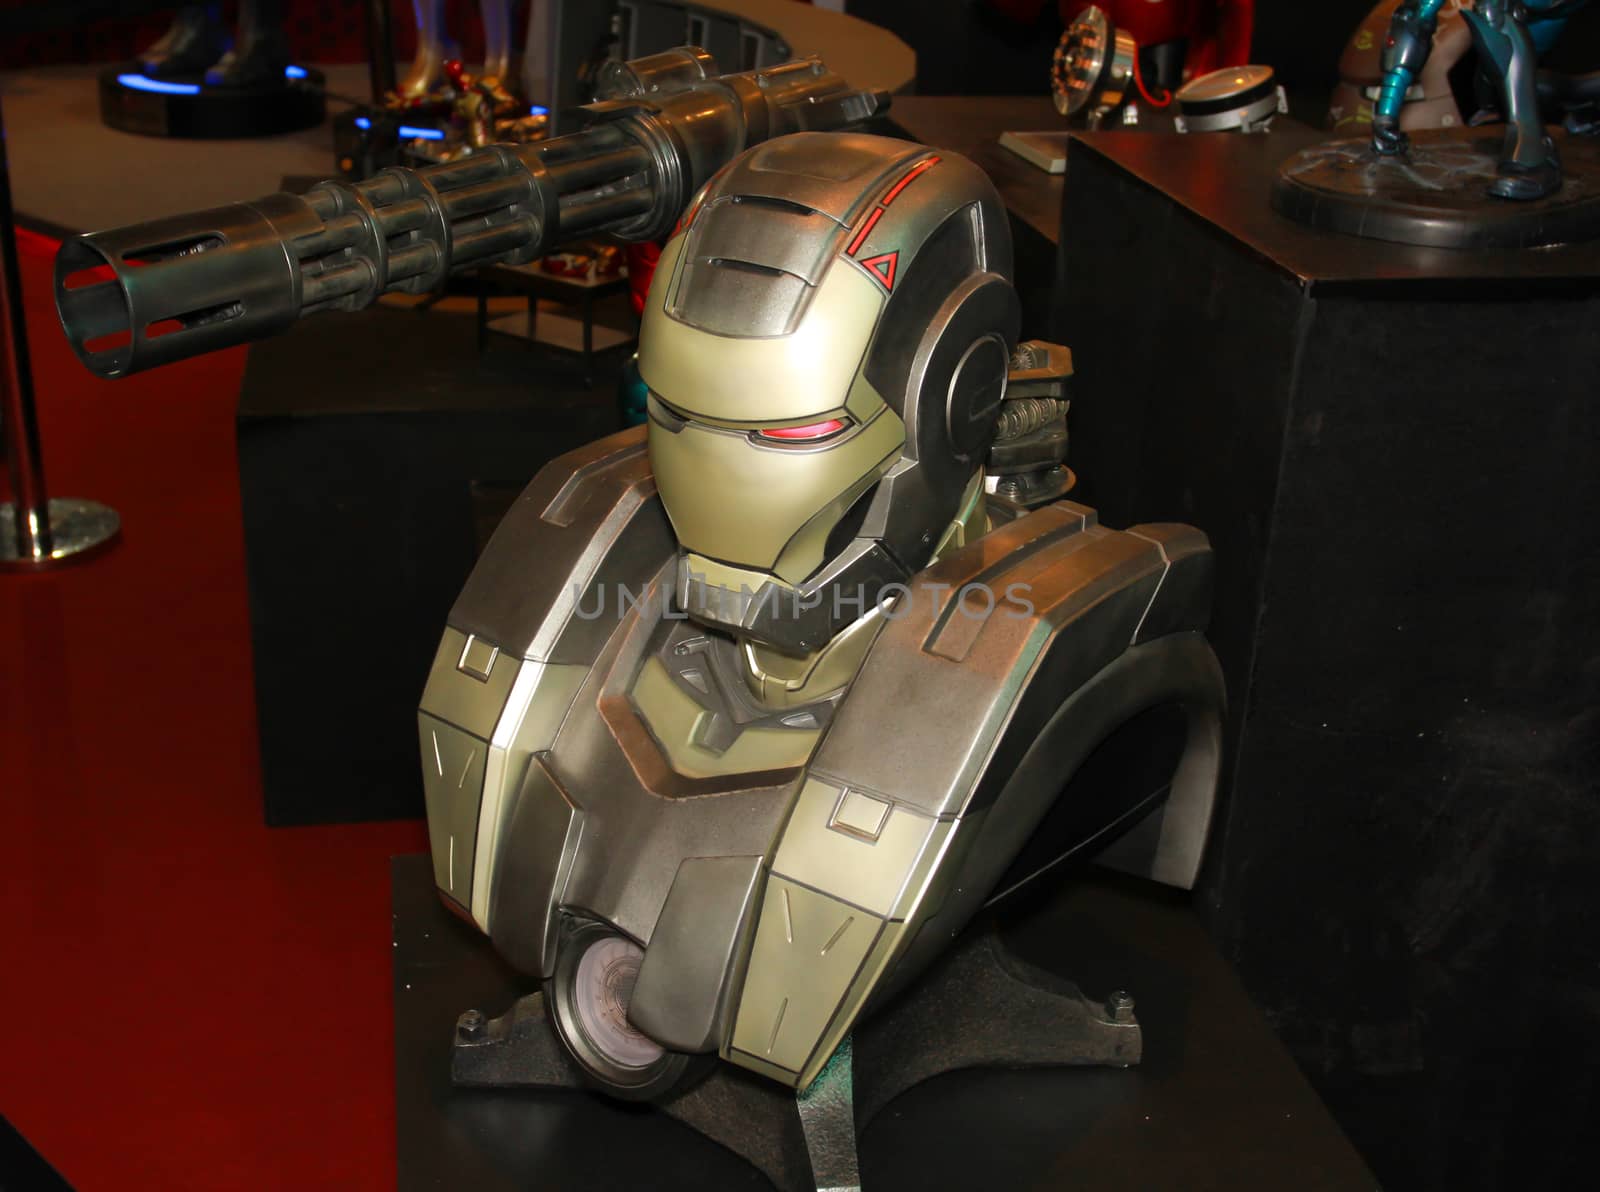 A model of the character Iron Man from the movies and comics 16 by redthirteen